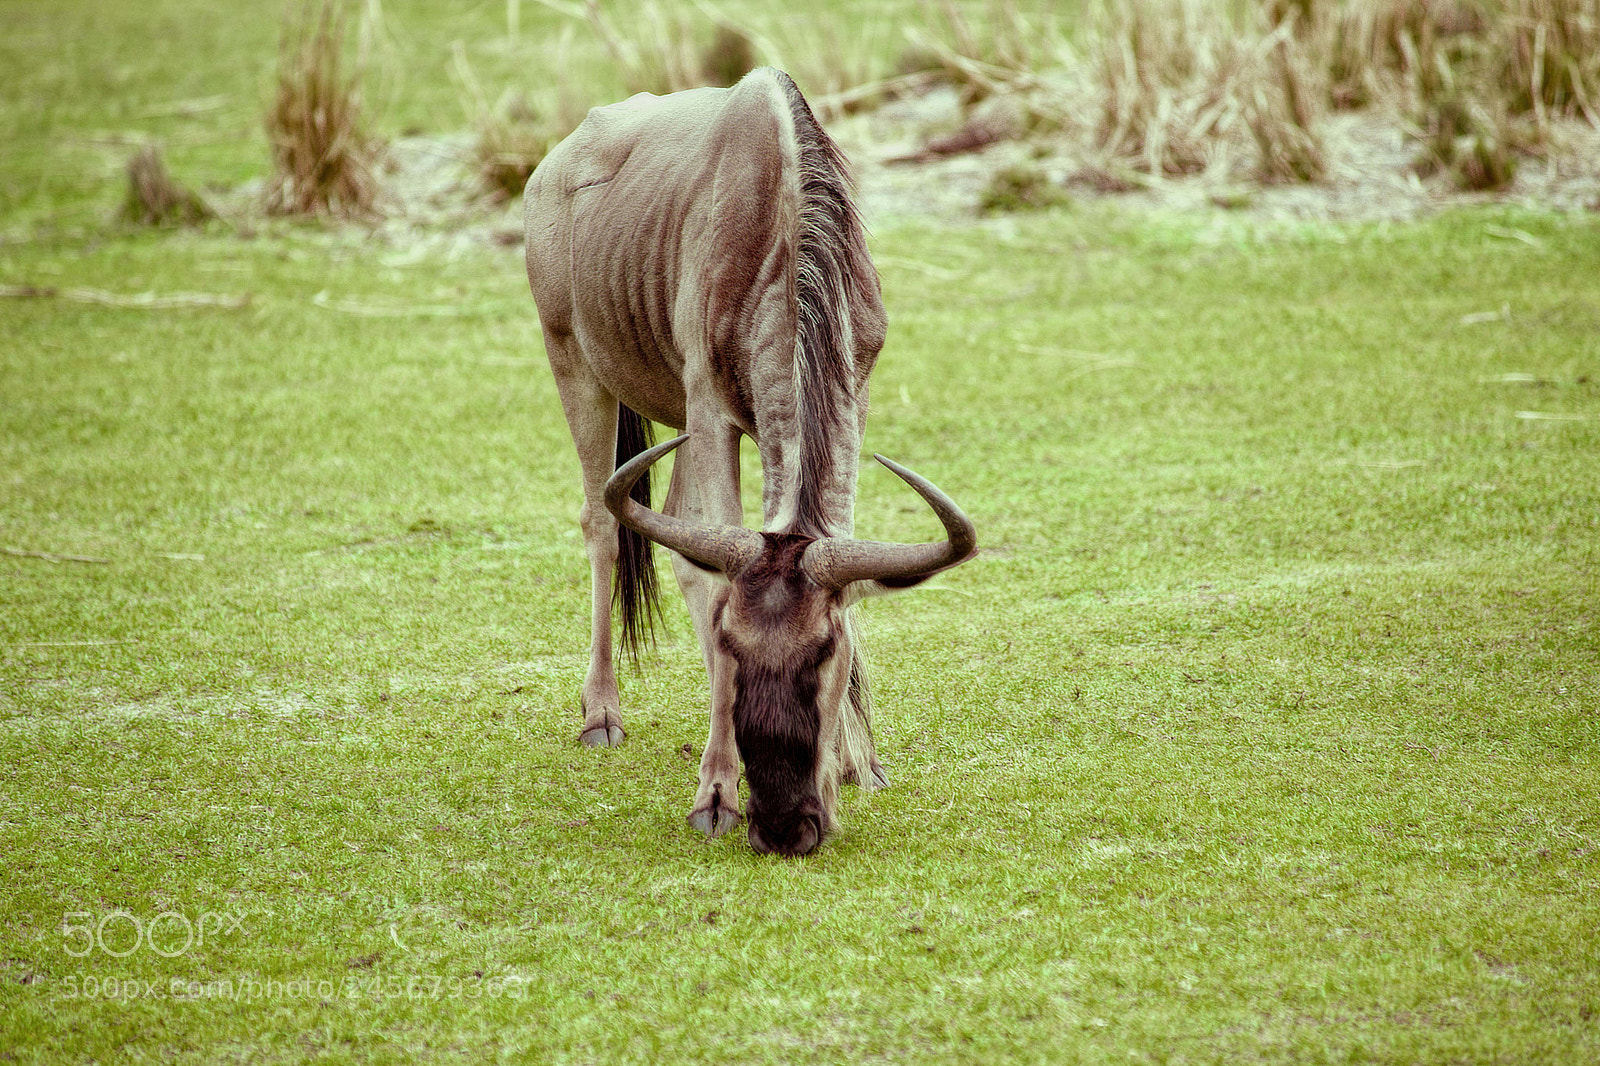 Sony a99 II sample photo. Blue wildebeest photography